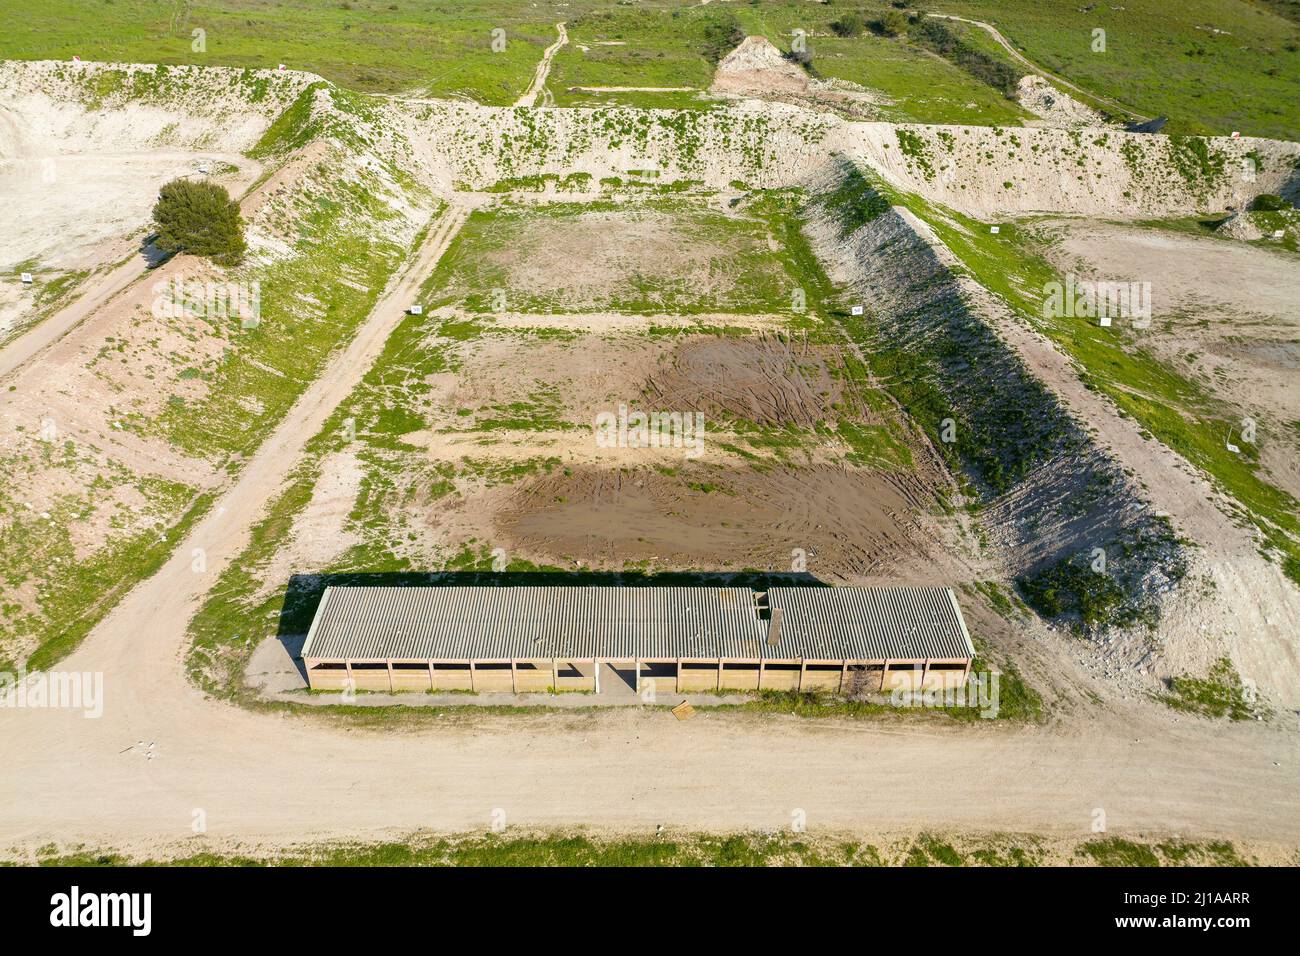 Open air military shooting range, Aerial view. Stock Photo